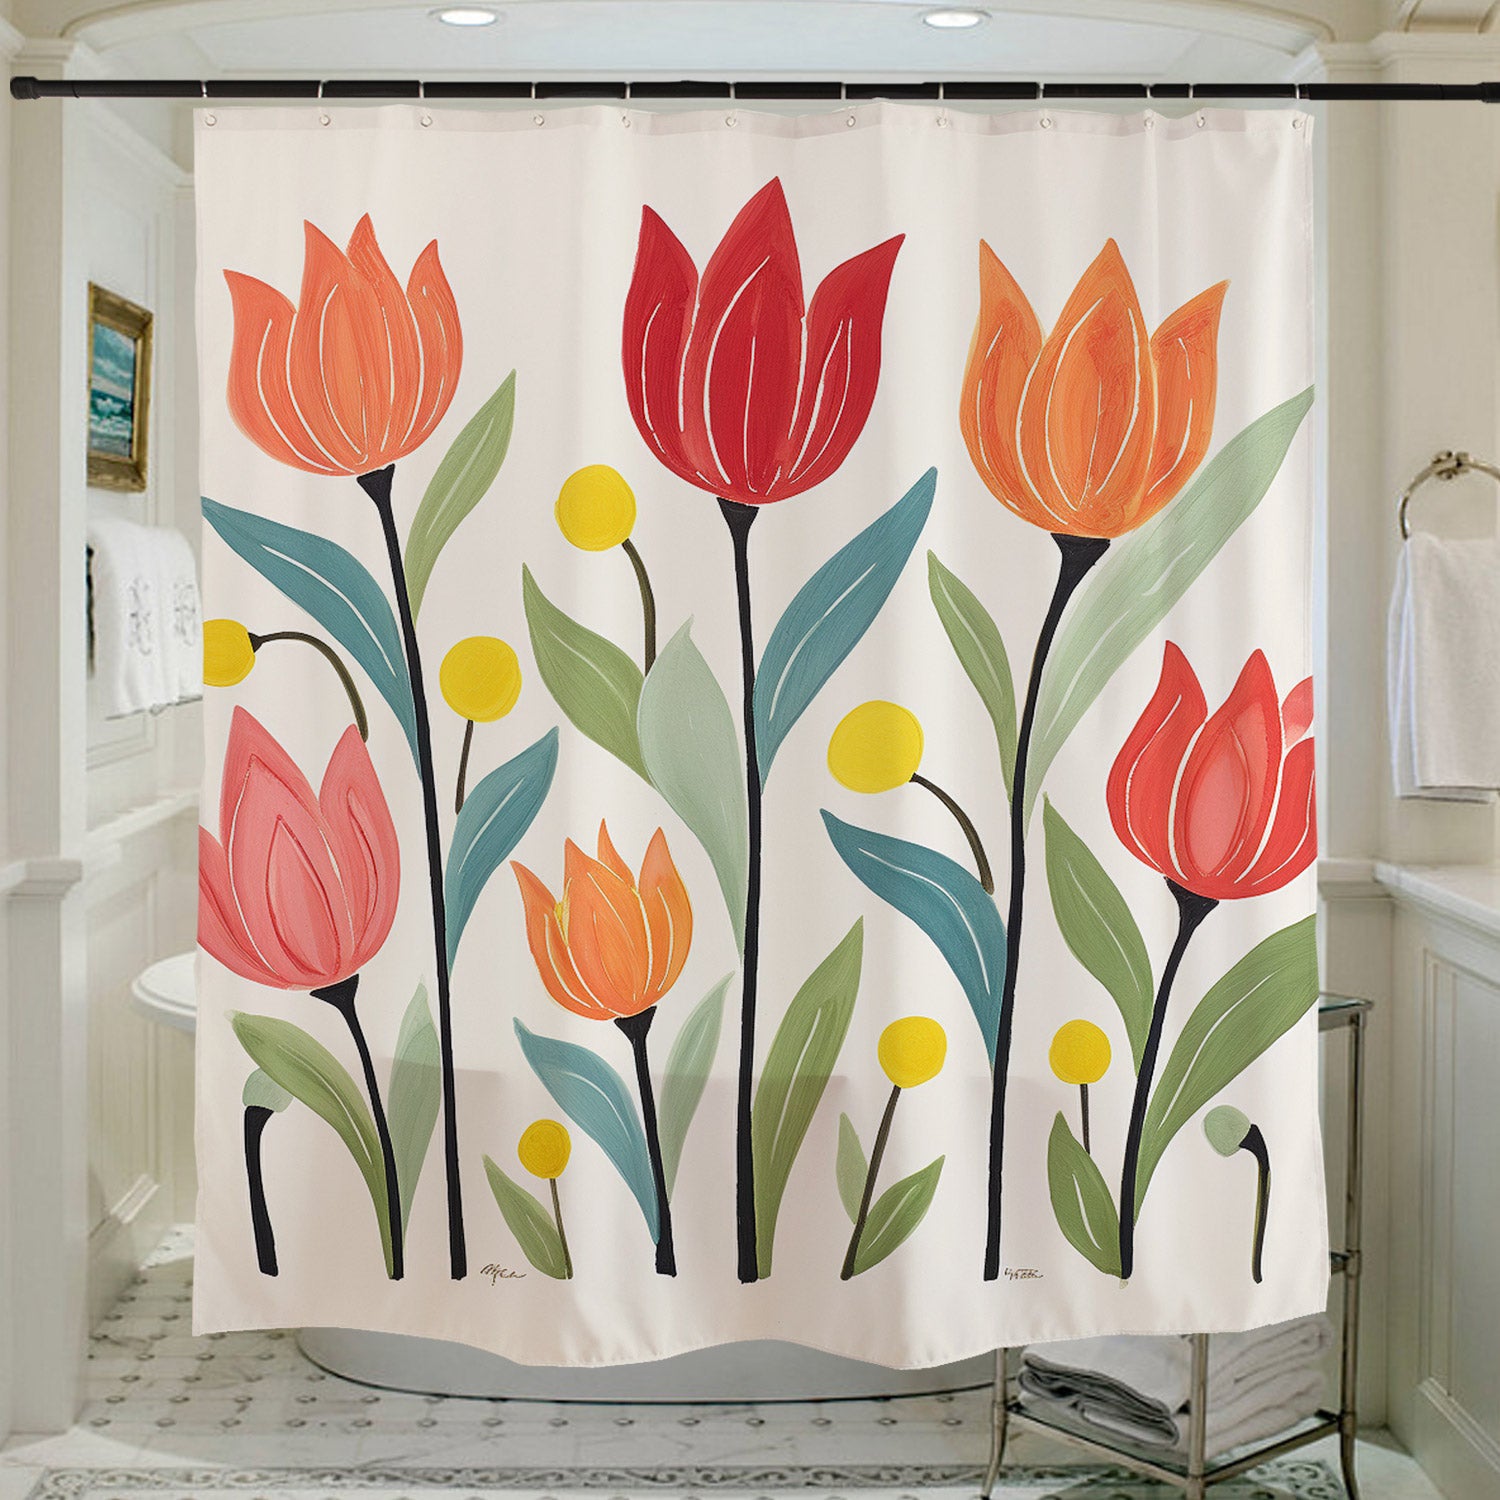 Feblilac Tulips Off-white Background Shower Curtain with Hooks